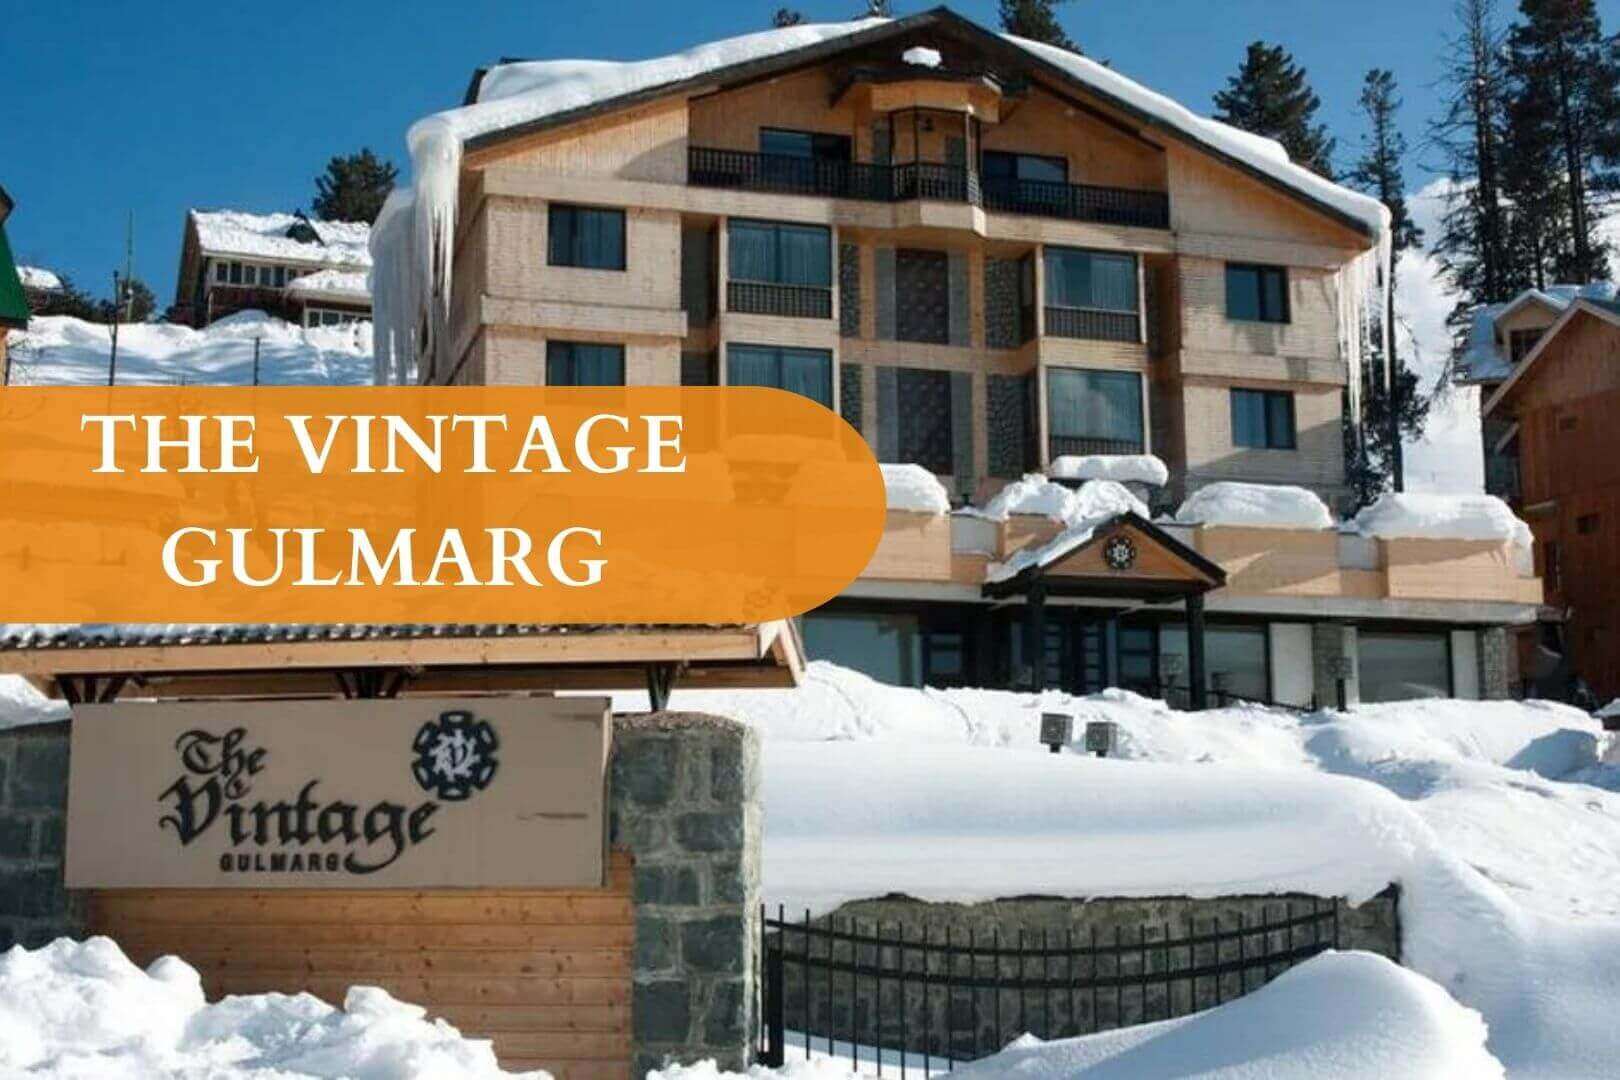 THE VINTAGE GULMARG, auli ski resort, skiing price in india, skiing packages in india, best ski resorts in india, gulmarg ski resort, ski resort manali, skiing in sikkim, luxury snow resorts india, ski resorts in india, indian ski resorts, best ski resorts in india, ski resorts india, skiing india, ski resort in india, ski resort india, skiing in india, india ski resorts, best place for skiing in india, best place to ski in india, best places to ski in india, best skiing places in india, ski india, ice skiing in india, skiing resort in india, solang ski resort, india ski resort, skiing resorts in india, ski resorts in the himalayas, skiing destinations in india, snow resorts in india, india skiing, try ski, best ski resort in india, skiing places in india, ski in india, snow skating in india, mountain resort in india, fagu ski resort, sking in india, best mountain resorts in india, ski resort himalayas, best places for skiing in india, snow view mountain resort, snow valley hotels, best places to ski, indian ski, ski places in india, best winter resorts in india, snow skiing in india, india ski, himalayan snow heights, ski resort manali, top snow resorts,